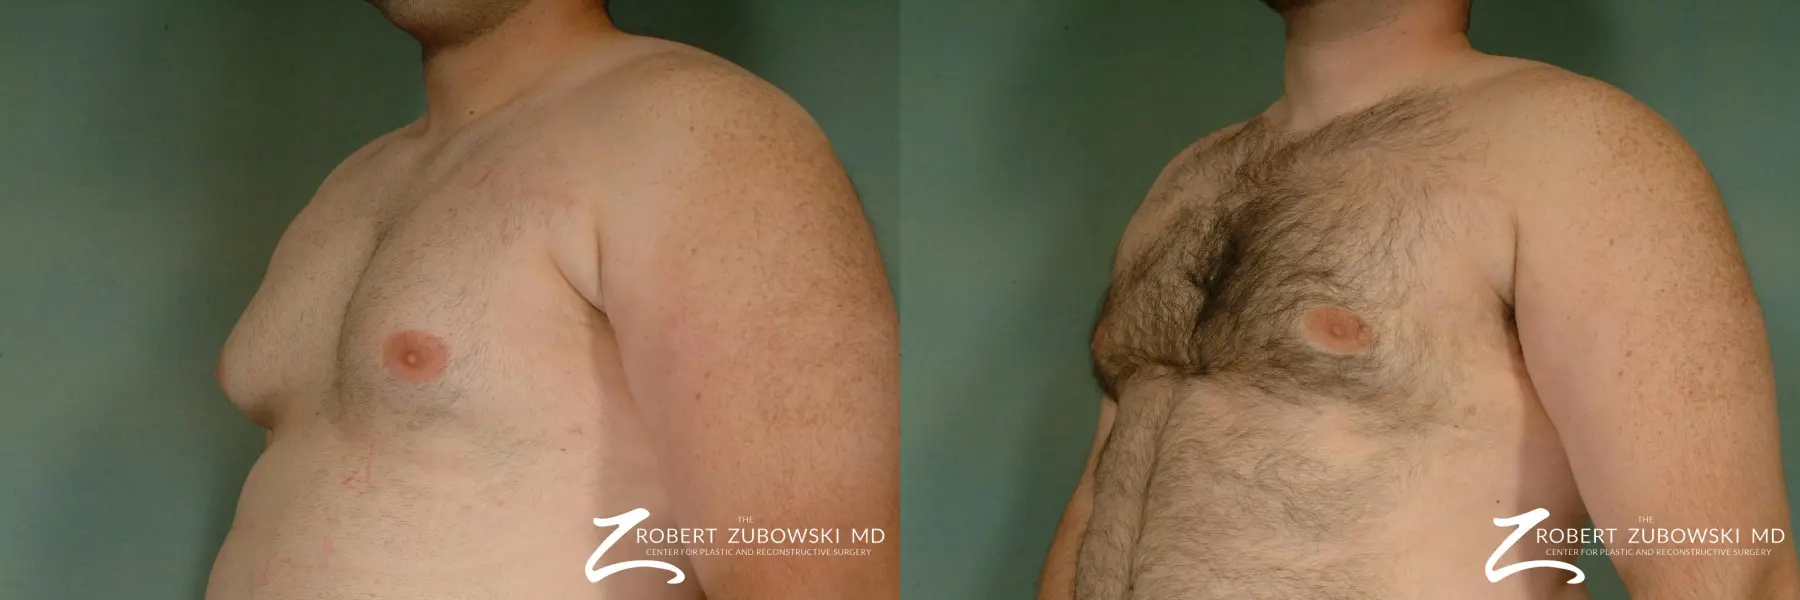 Gynecomastia: Patient 2 - Before and After 2